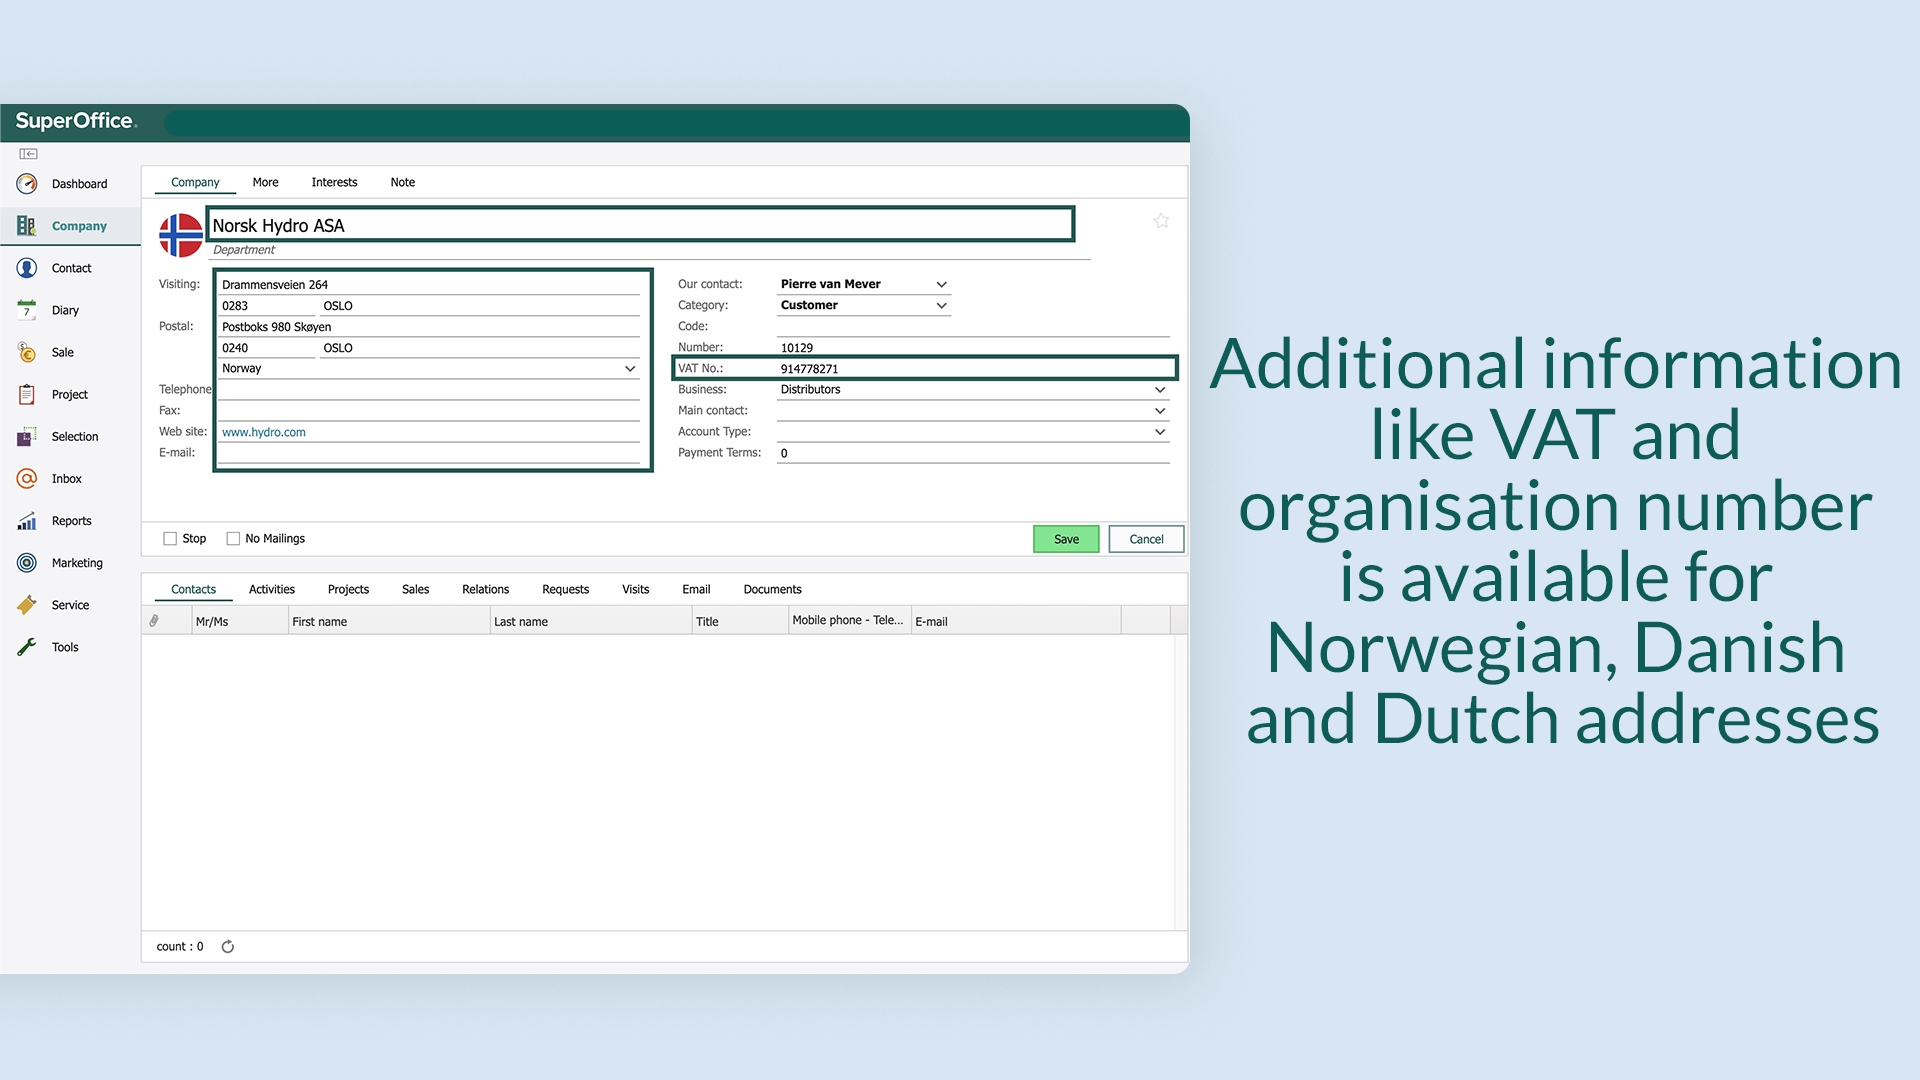 4. For Norwegian, Danish, and Dutch addresses extra information is such as VAT and Org. number is available.png